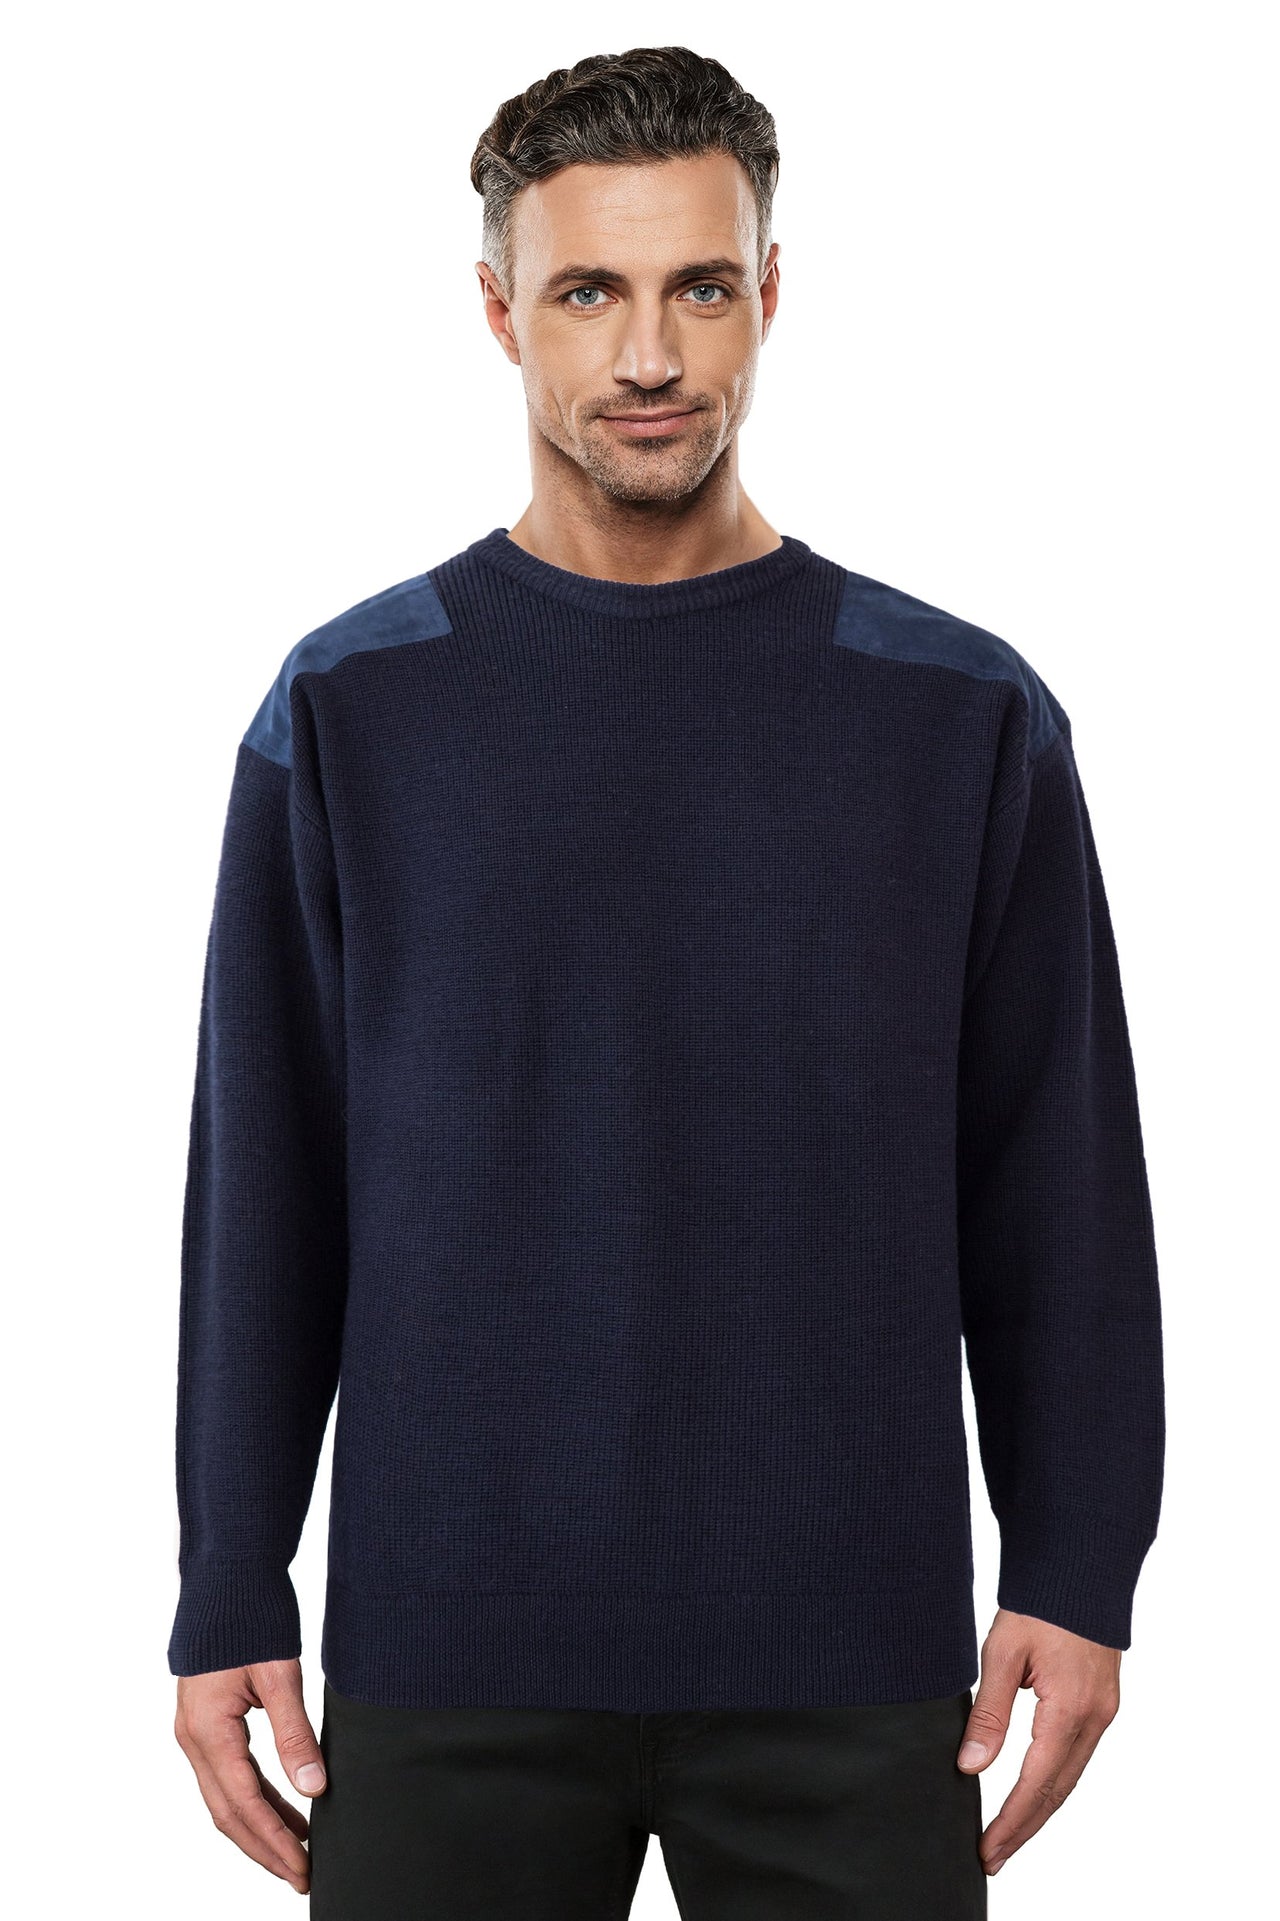 Navy Jumper With Elbow And Shoulder Patches Ansett Plain Knitwear